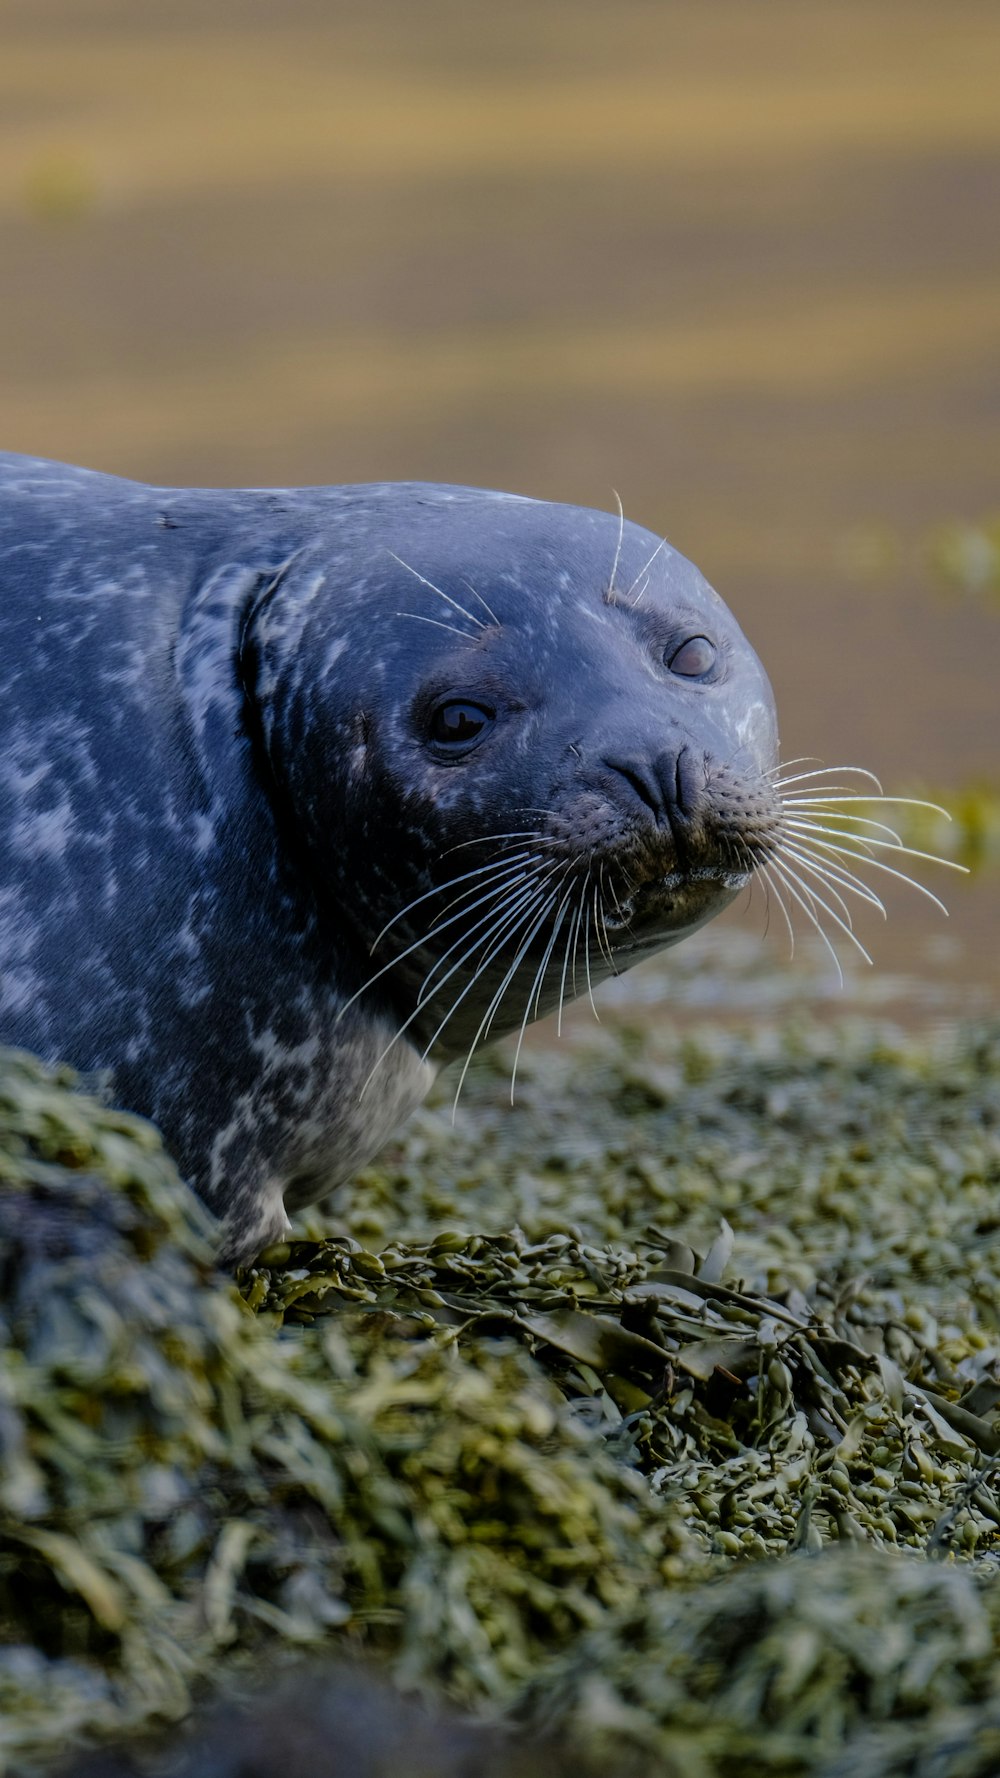 a gray seal is sitting on some seaweed